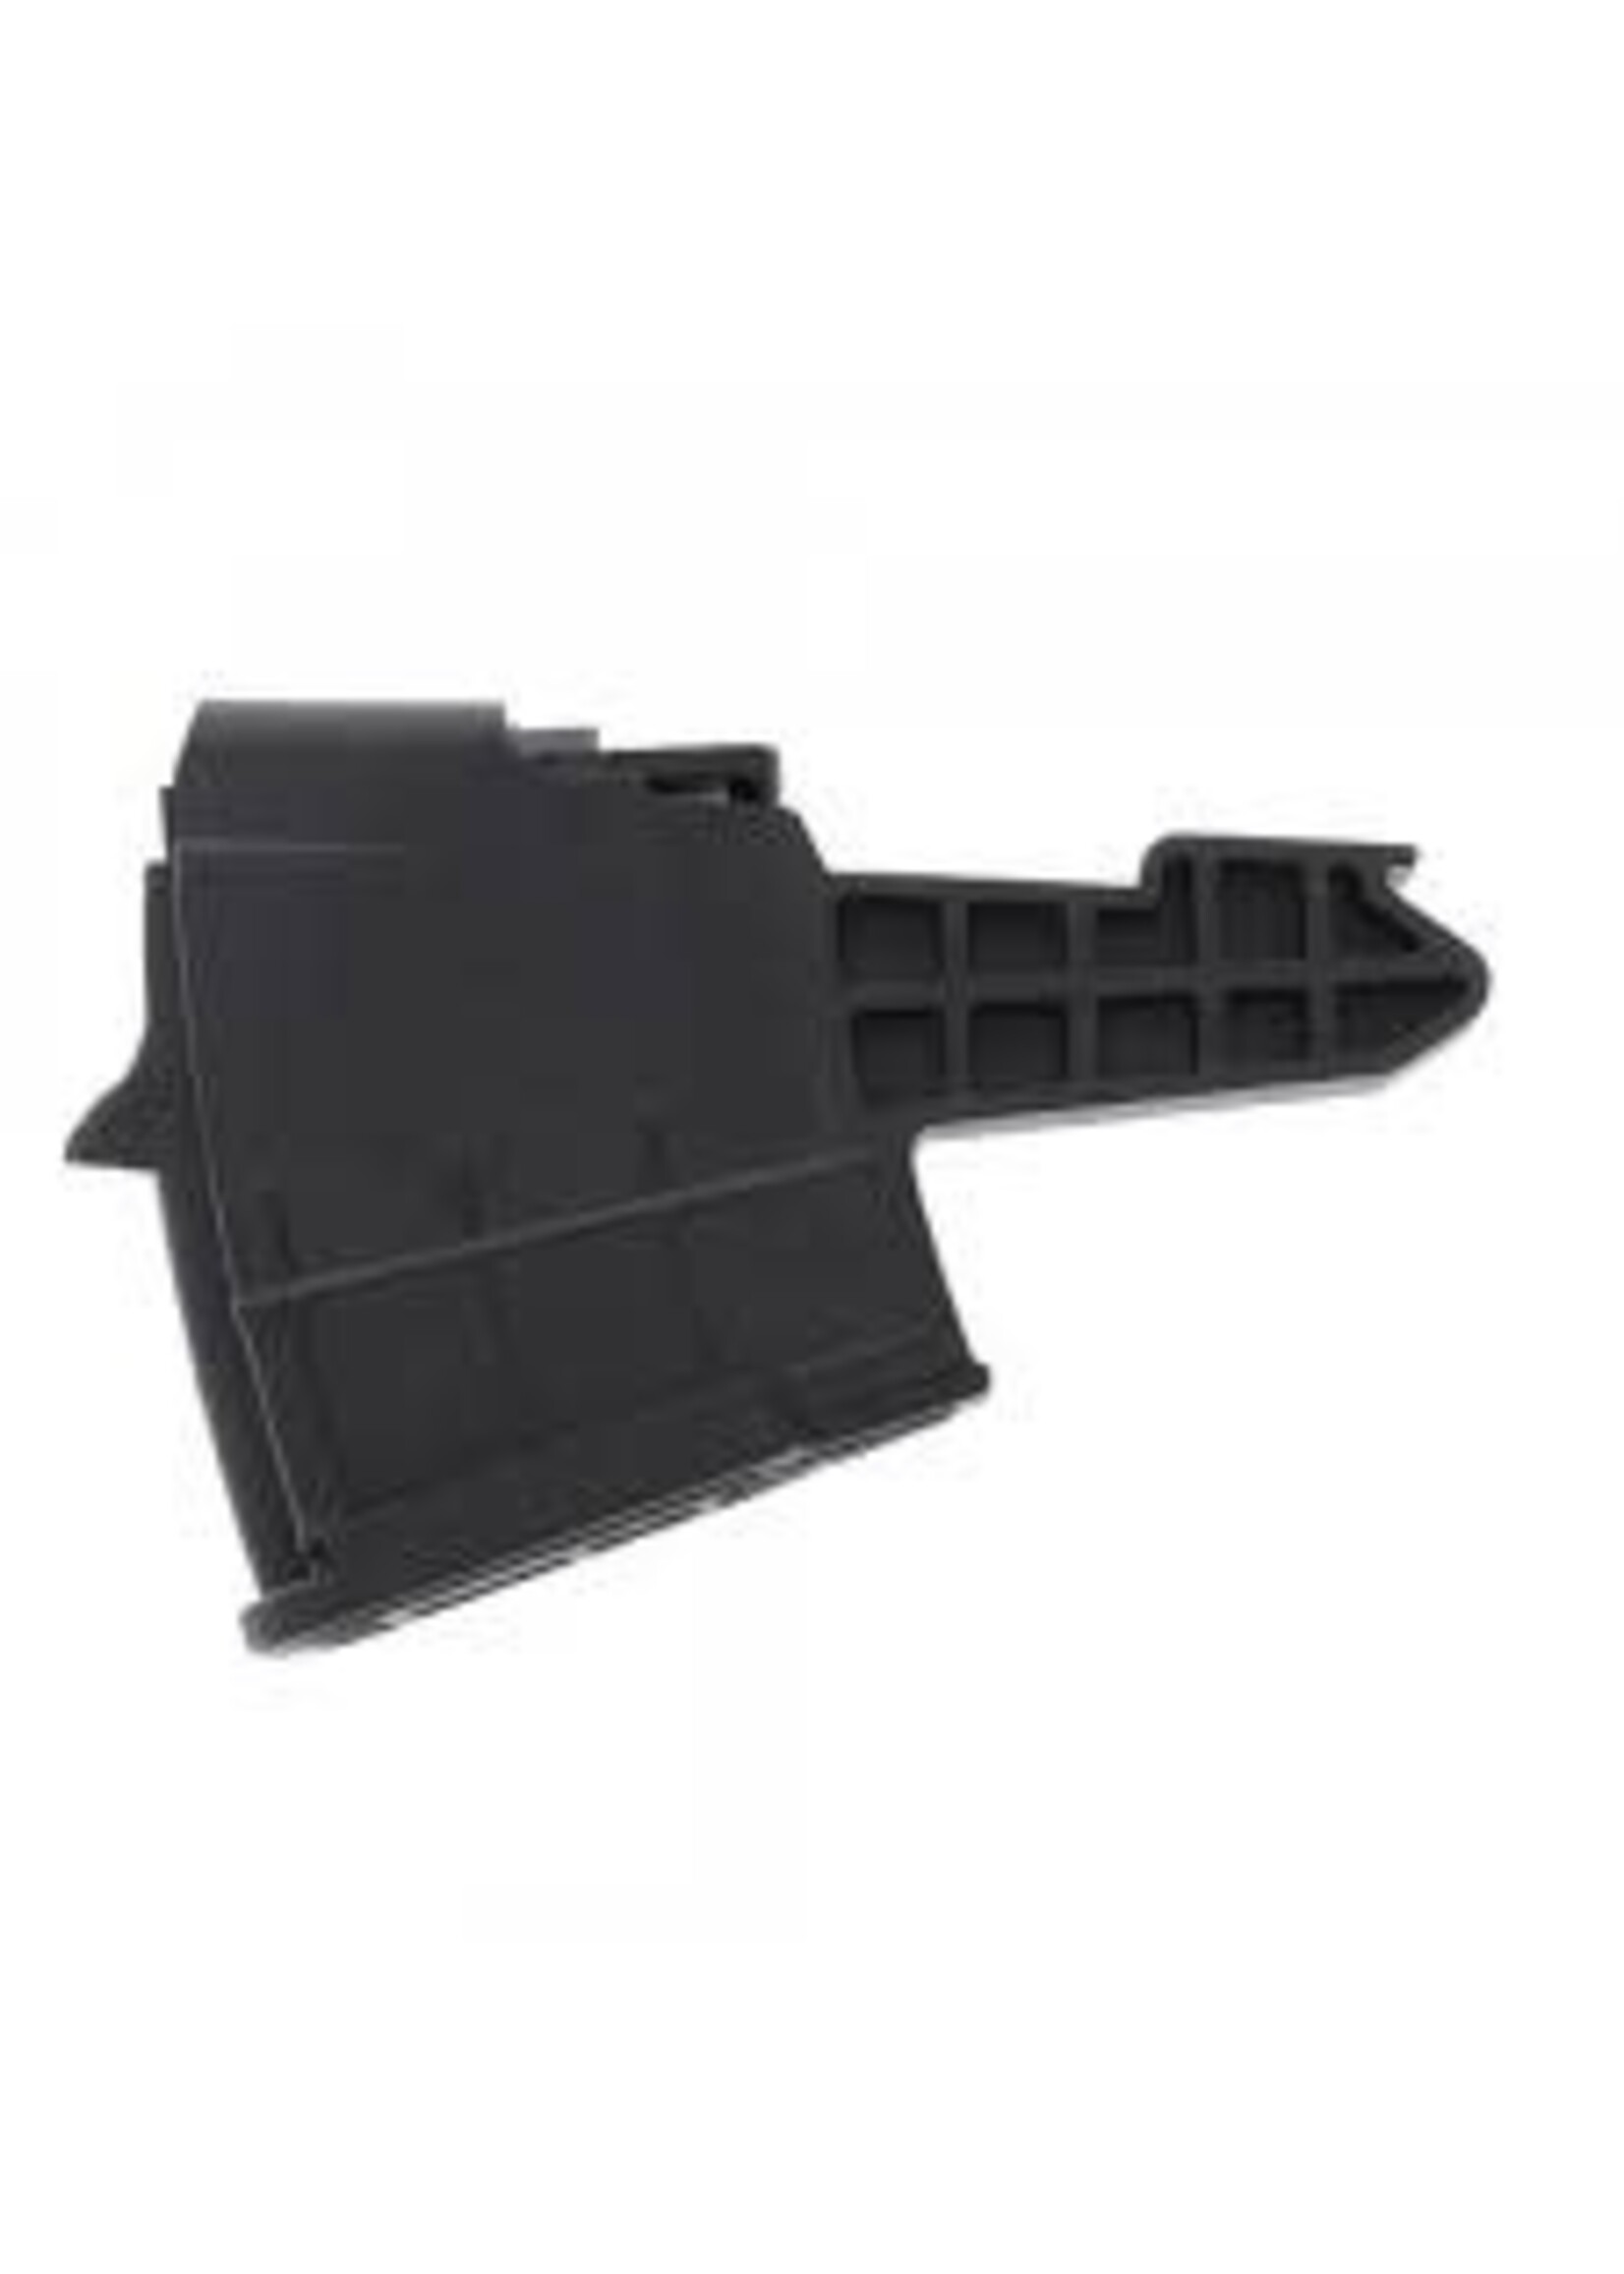 Pro-Mag PRO MAG SKS 7.62X39 BLK 5RD POLY MAGAZINE